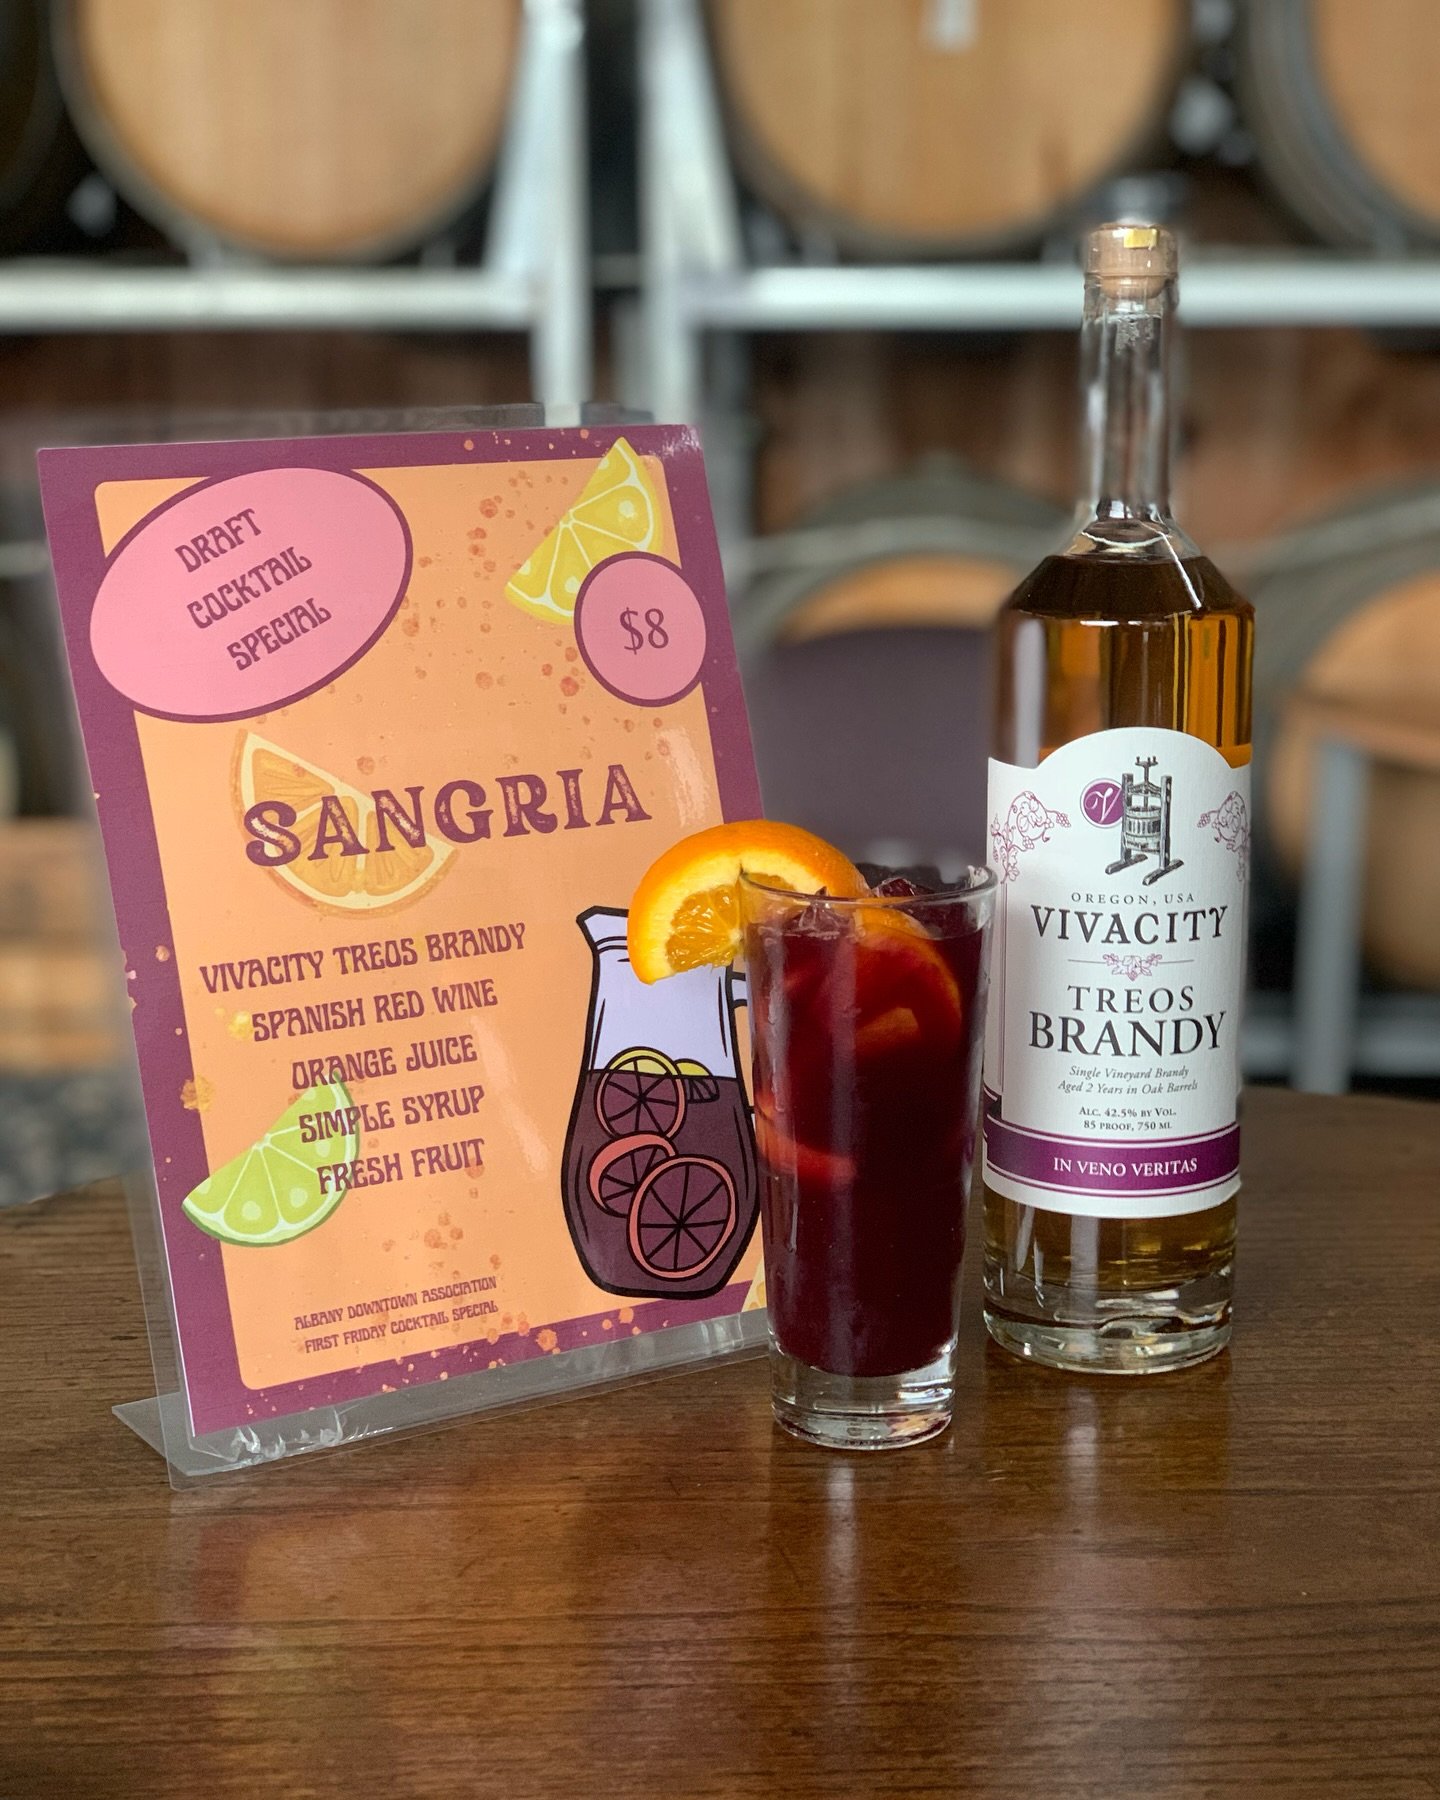 This weeks draft cocktail special is Red Wine Sangria. Made with Spanish wine and Vivacity Treos Brandy. Make sure to stop in this Friday after the Albany Downtown wine walk to try this refreshing wine cocktail.